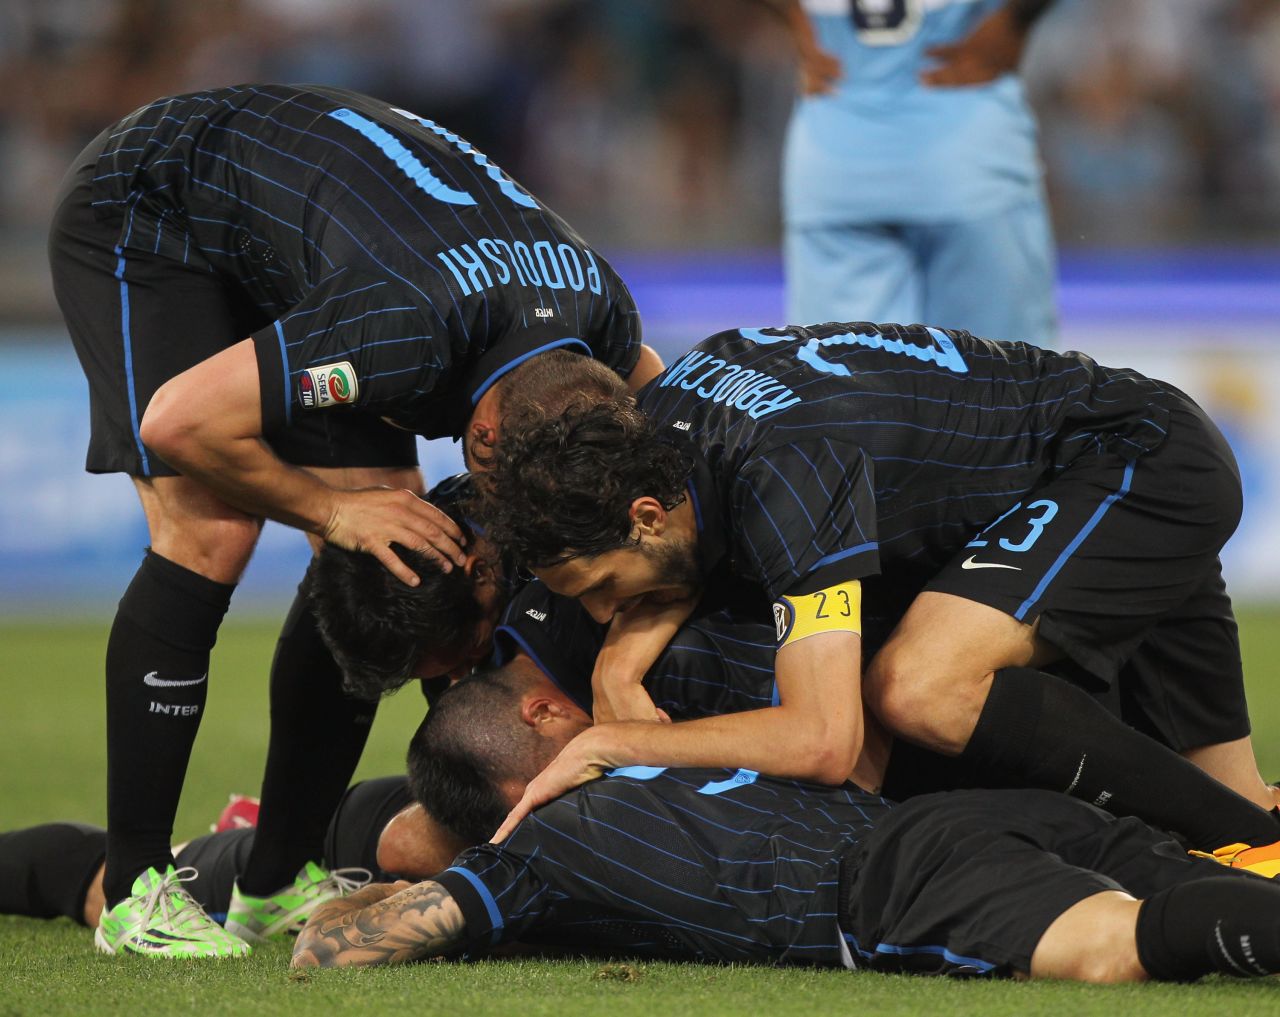 Inter Milan players mob Hernanes after his brace earned the team an important three points, keeping them in the hunt for a Europa League place.